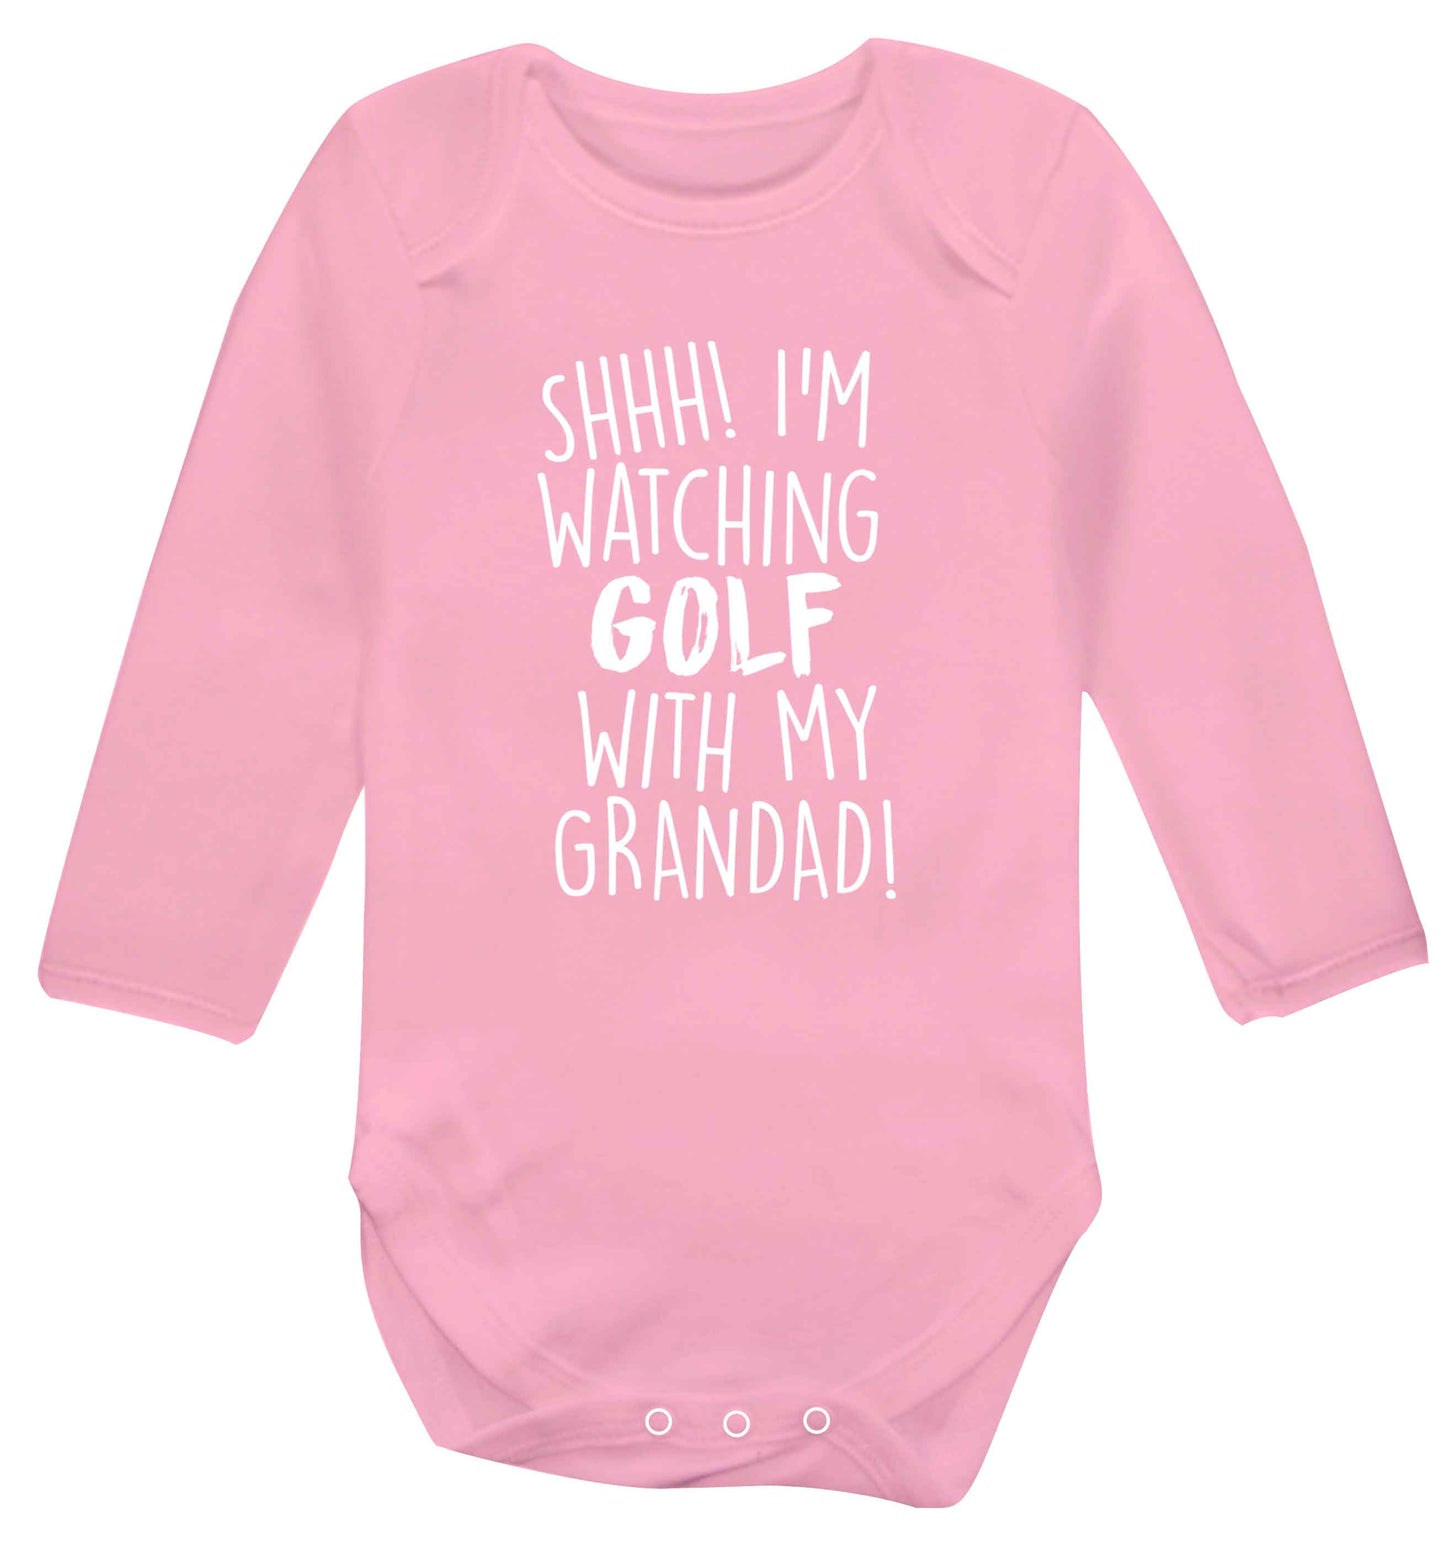 Shh I'm watching golf with my grandad Baby Vest long sleeved pale pink 6-12 months